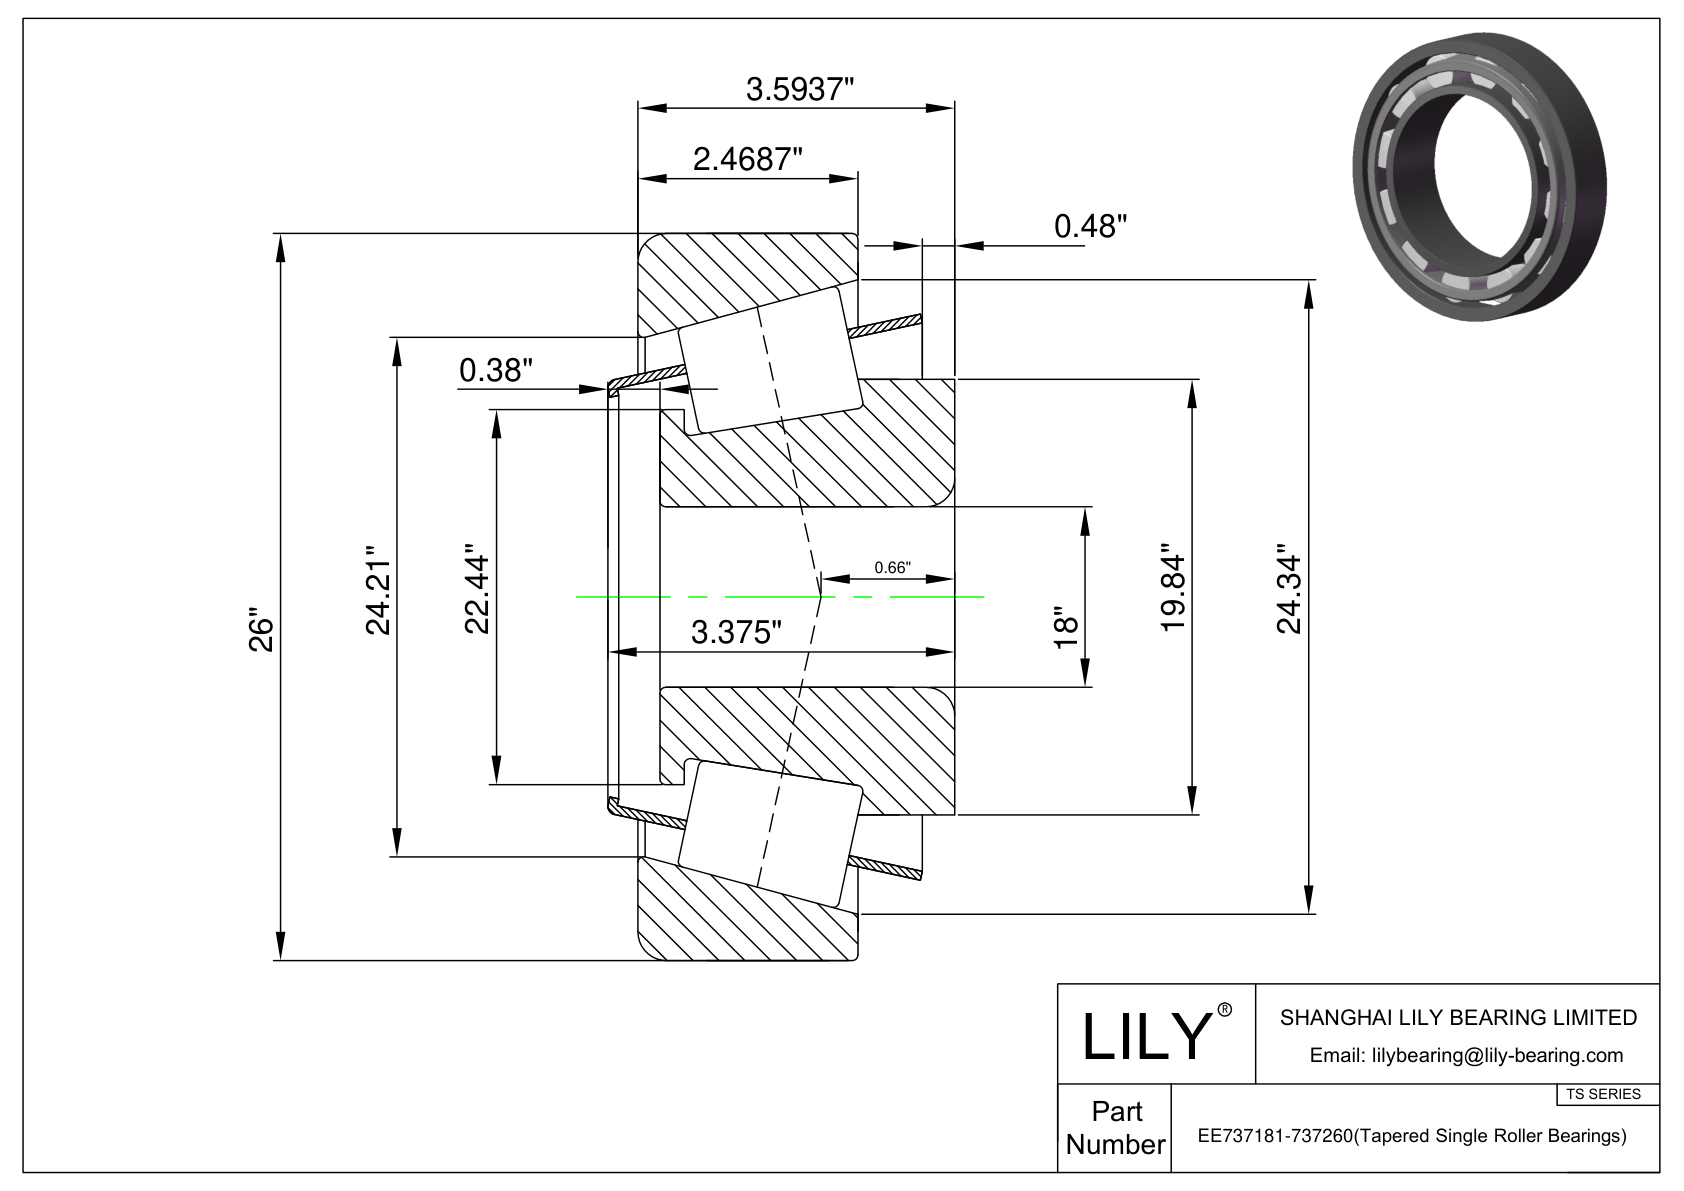 EE737181-737260 TS (Tapered Single Roller Bearings) (Imperial) cad drawing